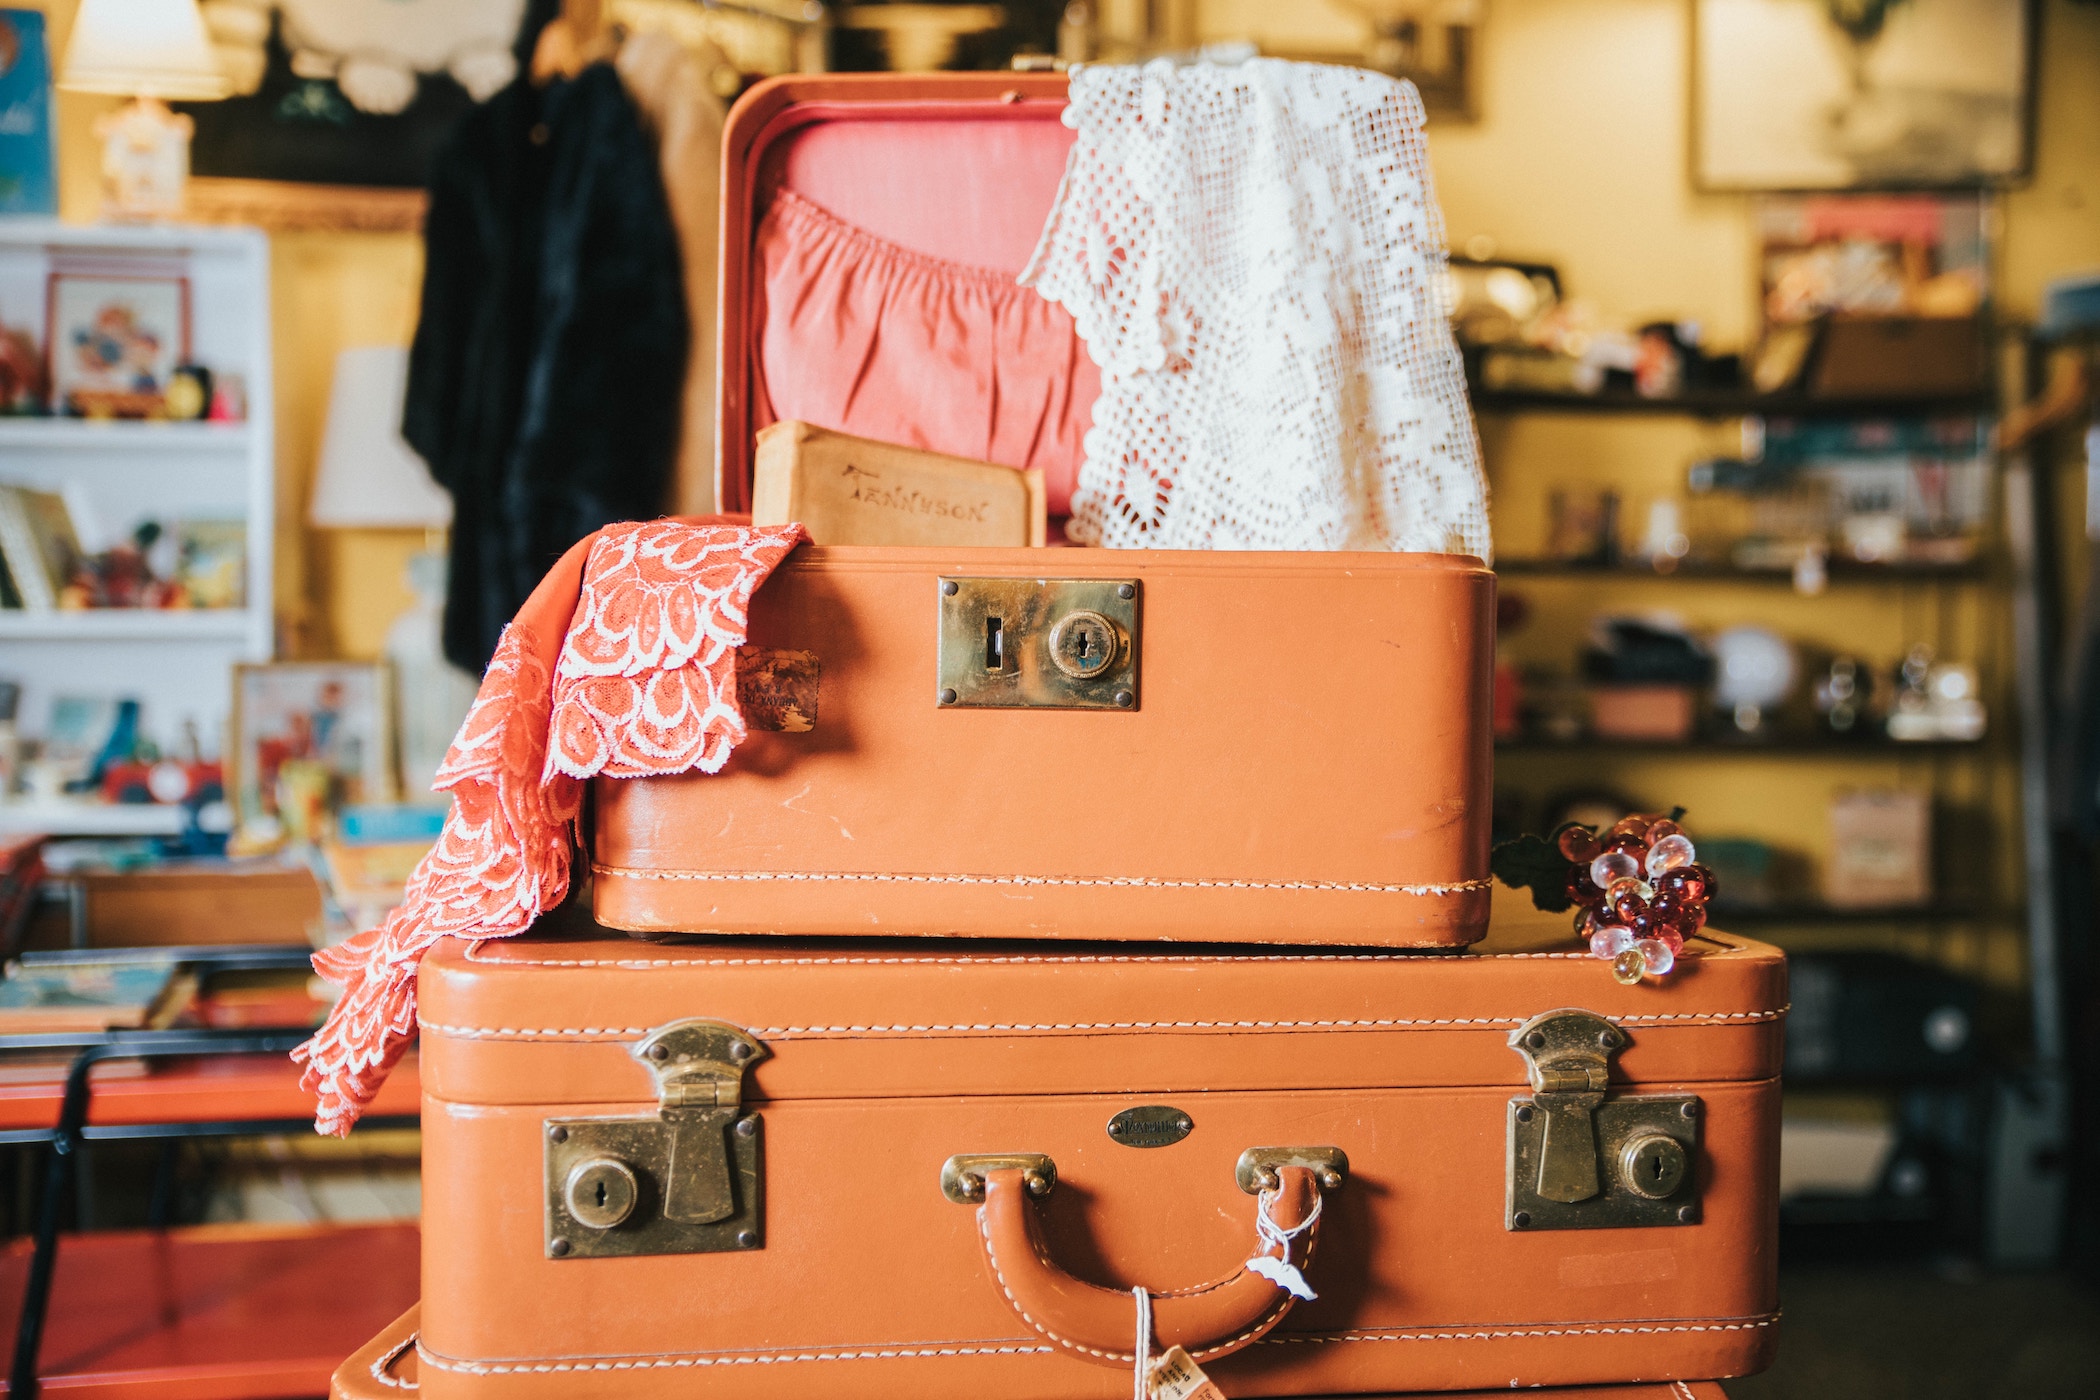 Pink suitcases inside bedroom | Greater price appreciation correlates to higher turnover rates for homeowners, according to new data from LendingTree.